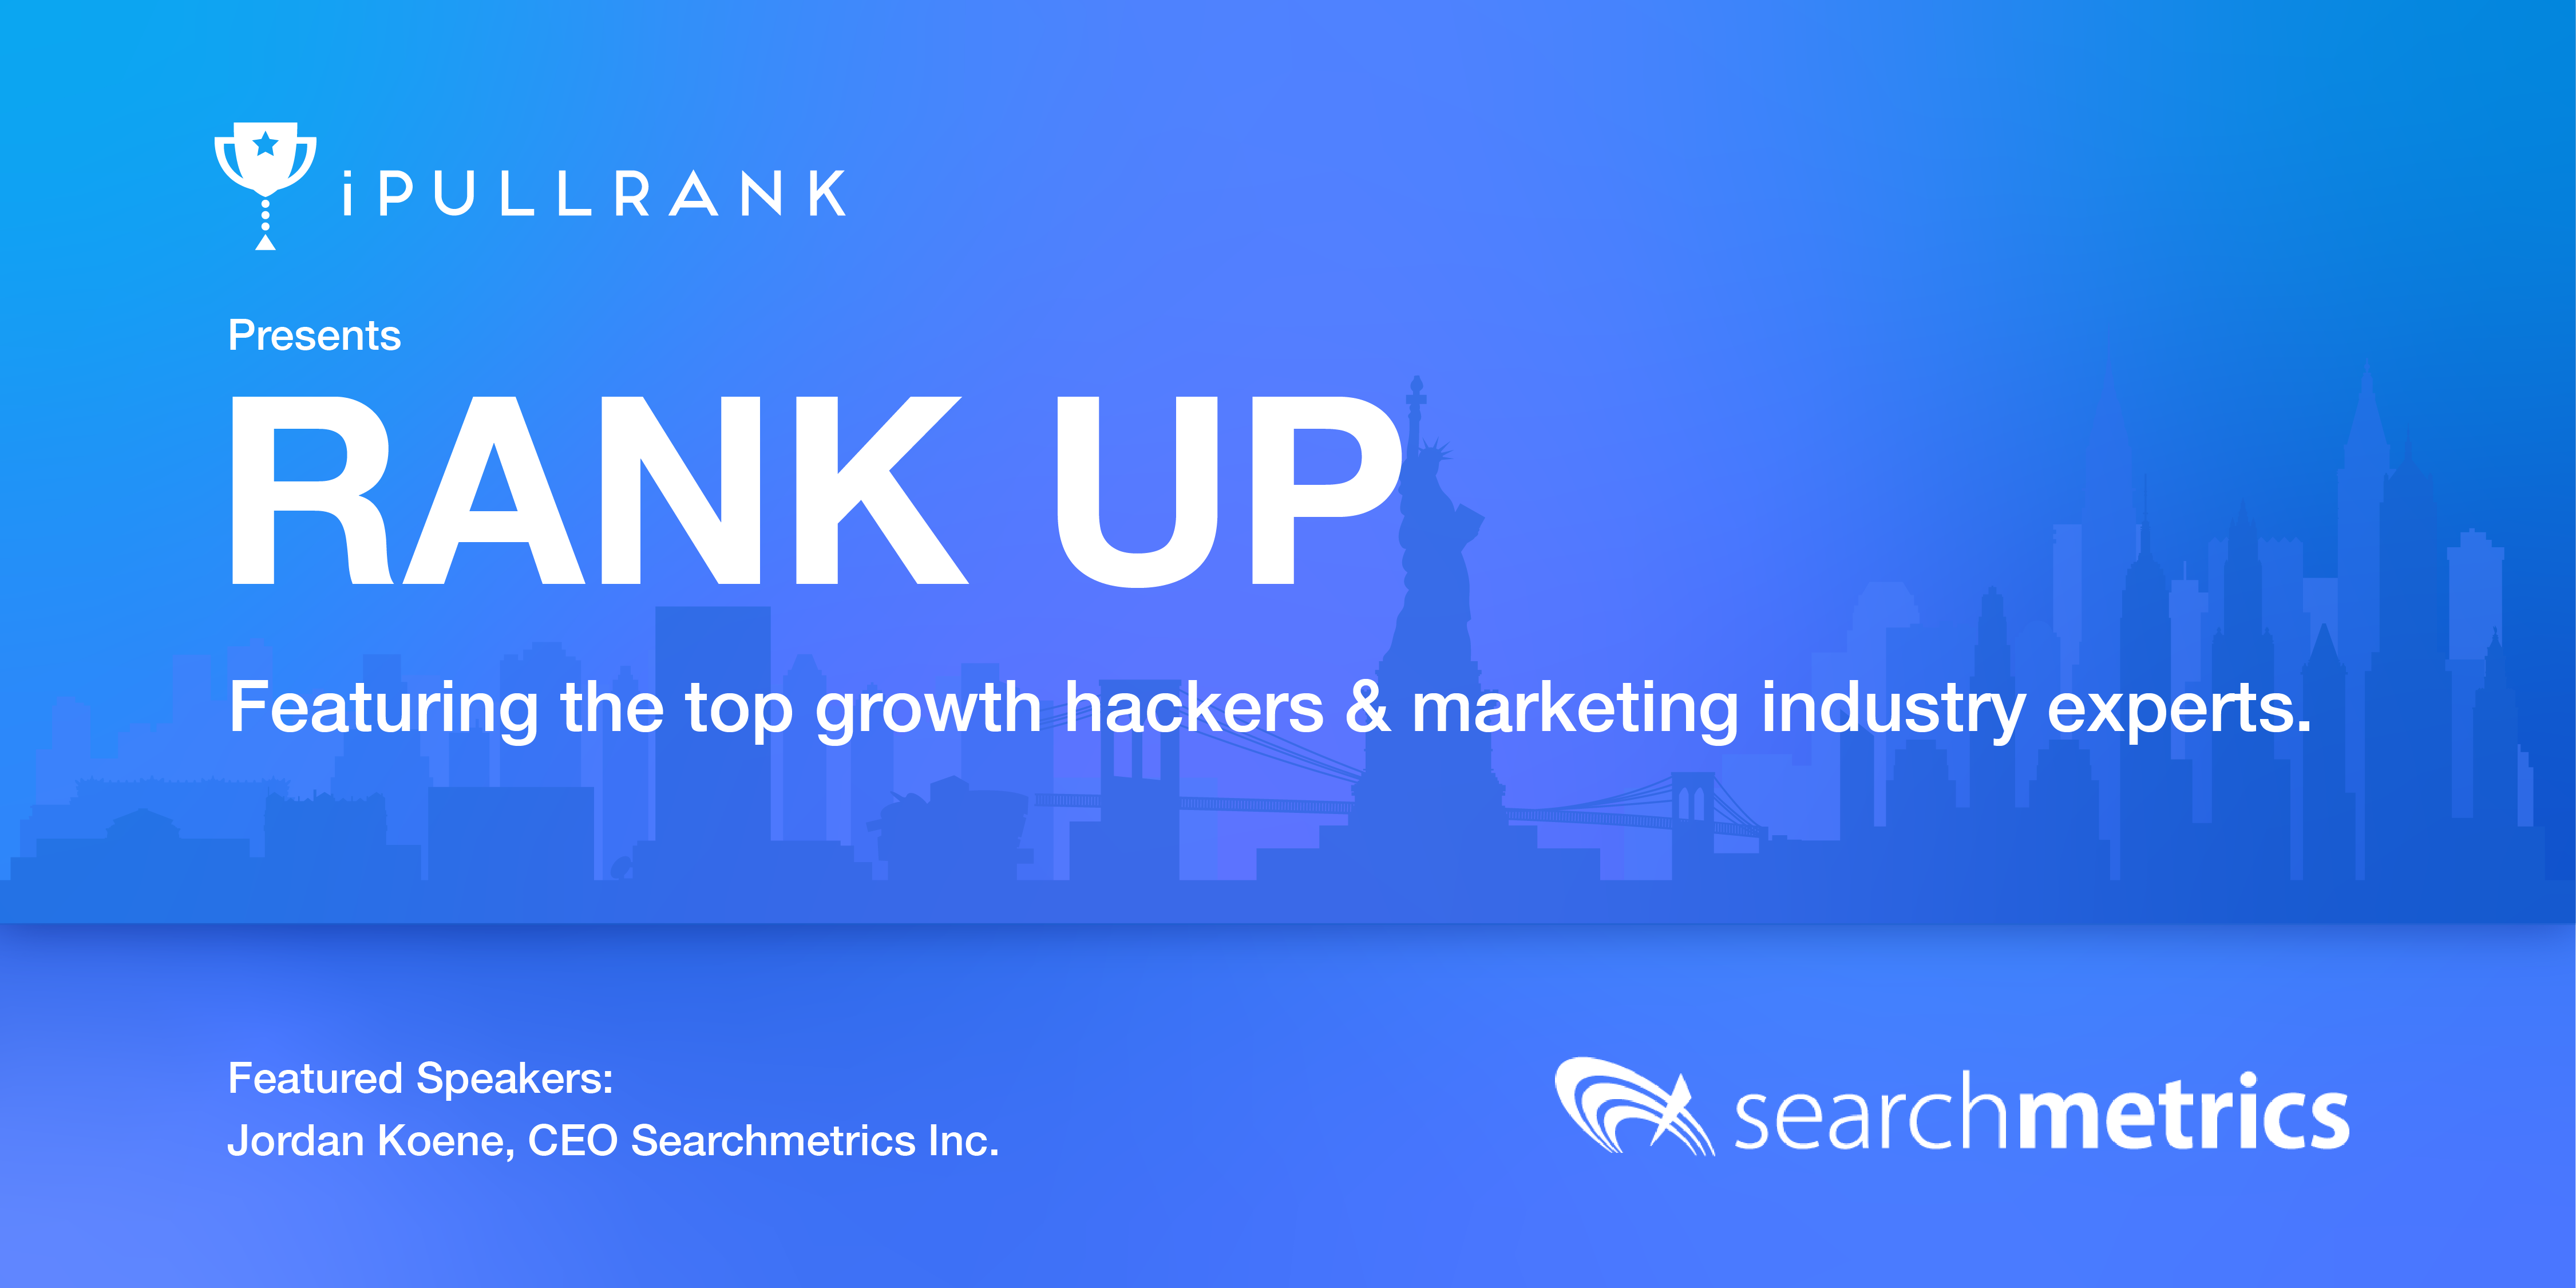 Rank UP - Marketing Industry Event Featuring Leading Content Strategists